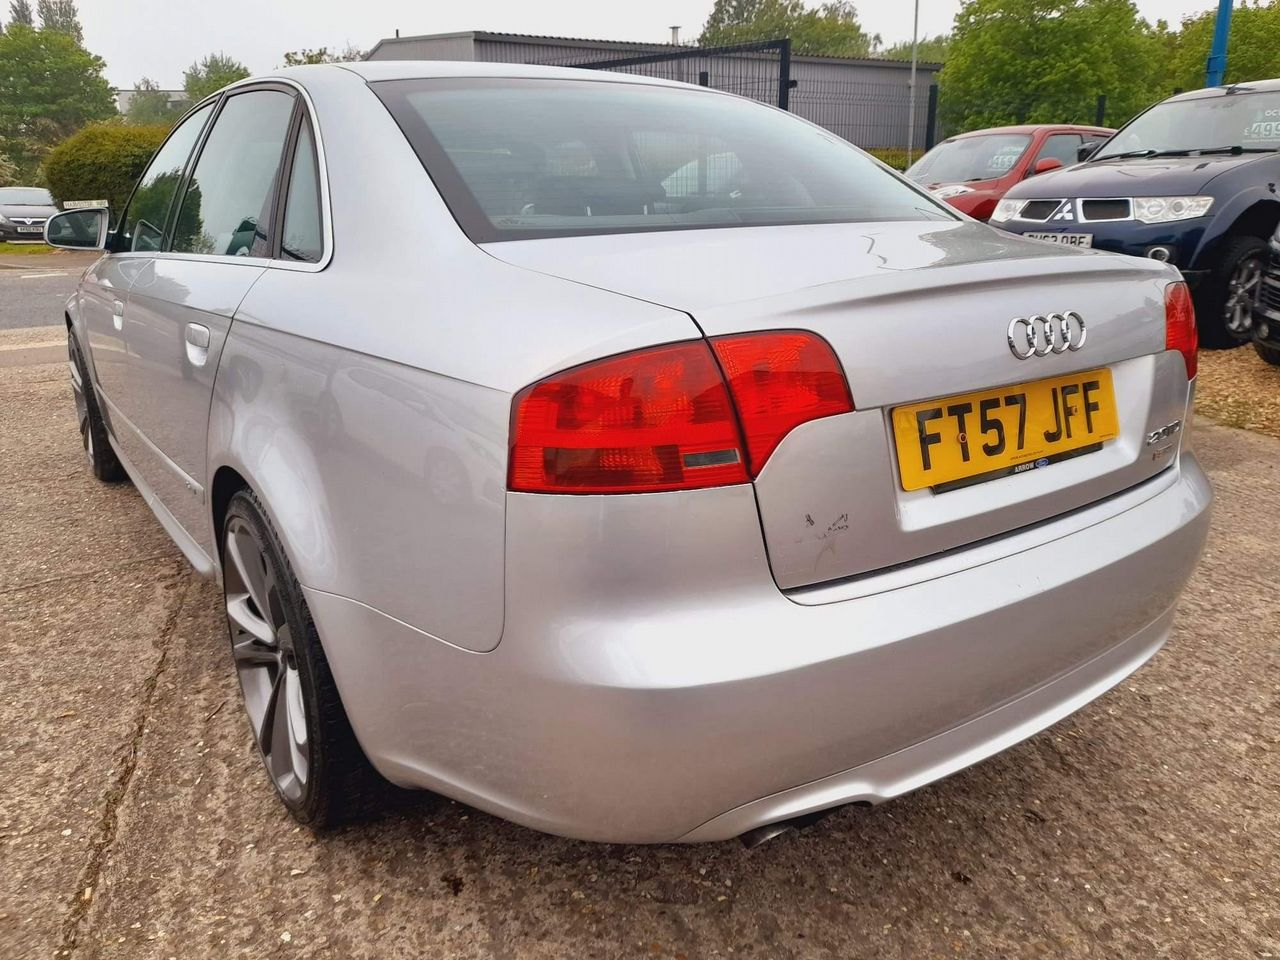 2008 Audi A4 2.0 TDI S line CVT 4dr - Picture 7 of 50